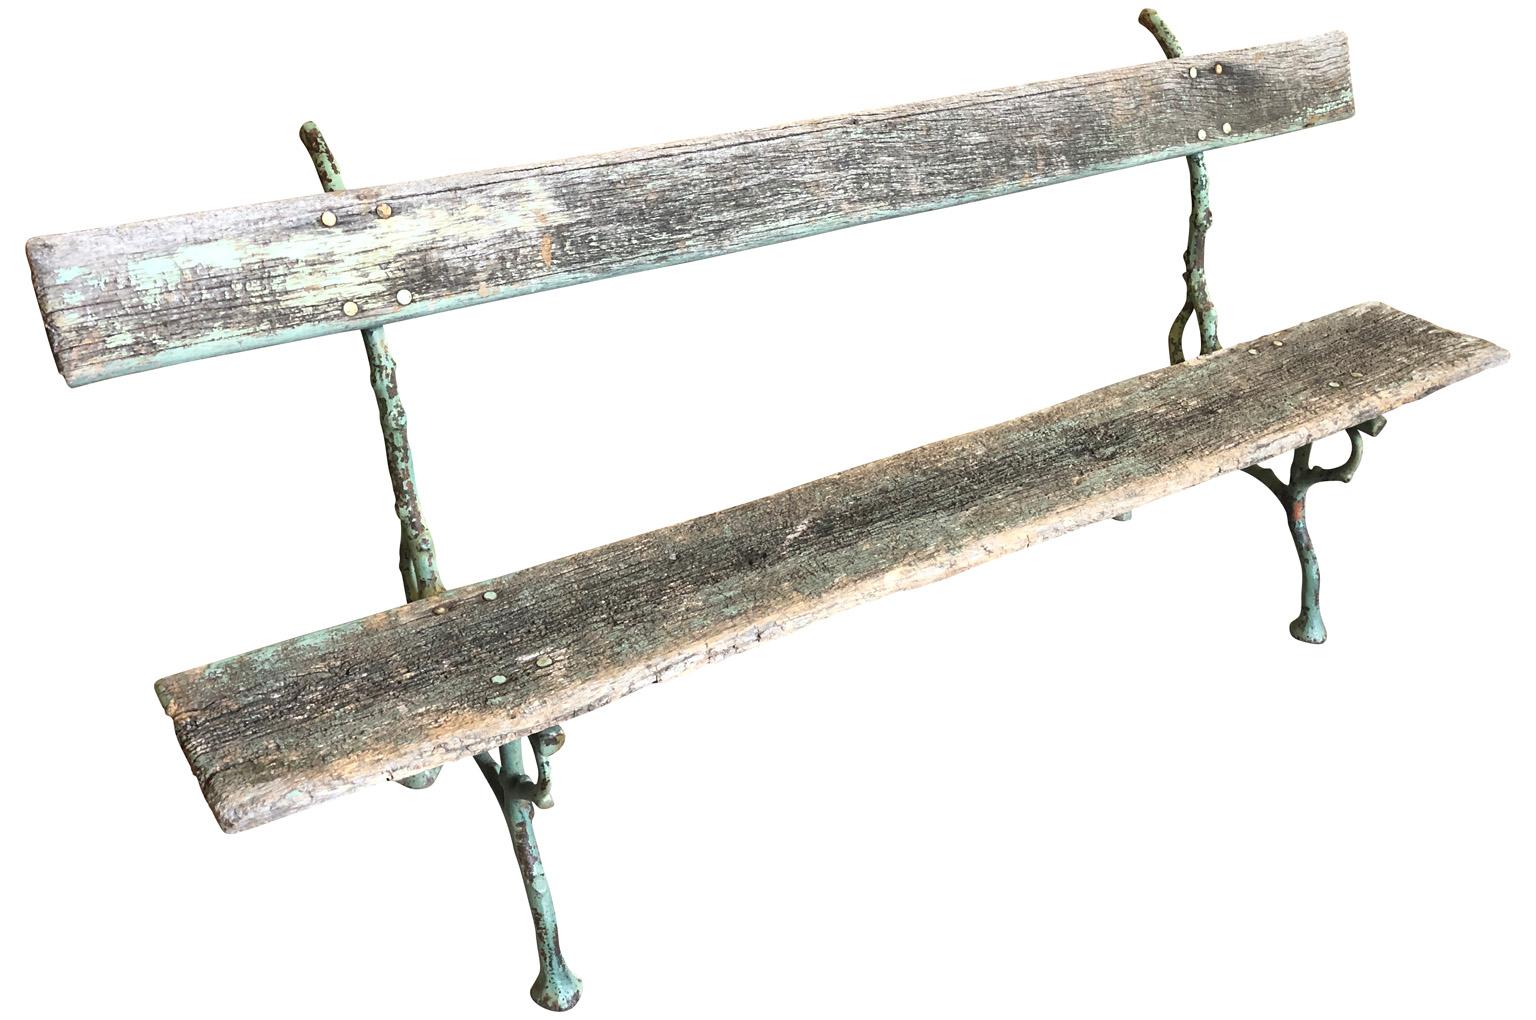 A very charming late 19th century garden bench from the Provenance region of France. Beautifully constructed from wonderful cast iron faux bois base and wooden seat and back. Fabulous patina.